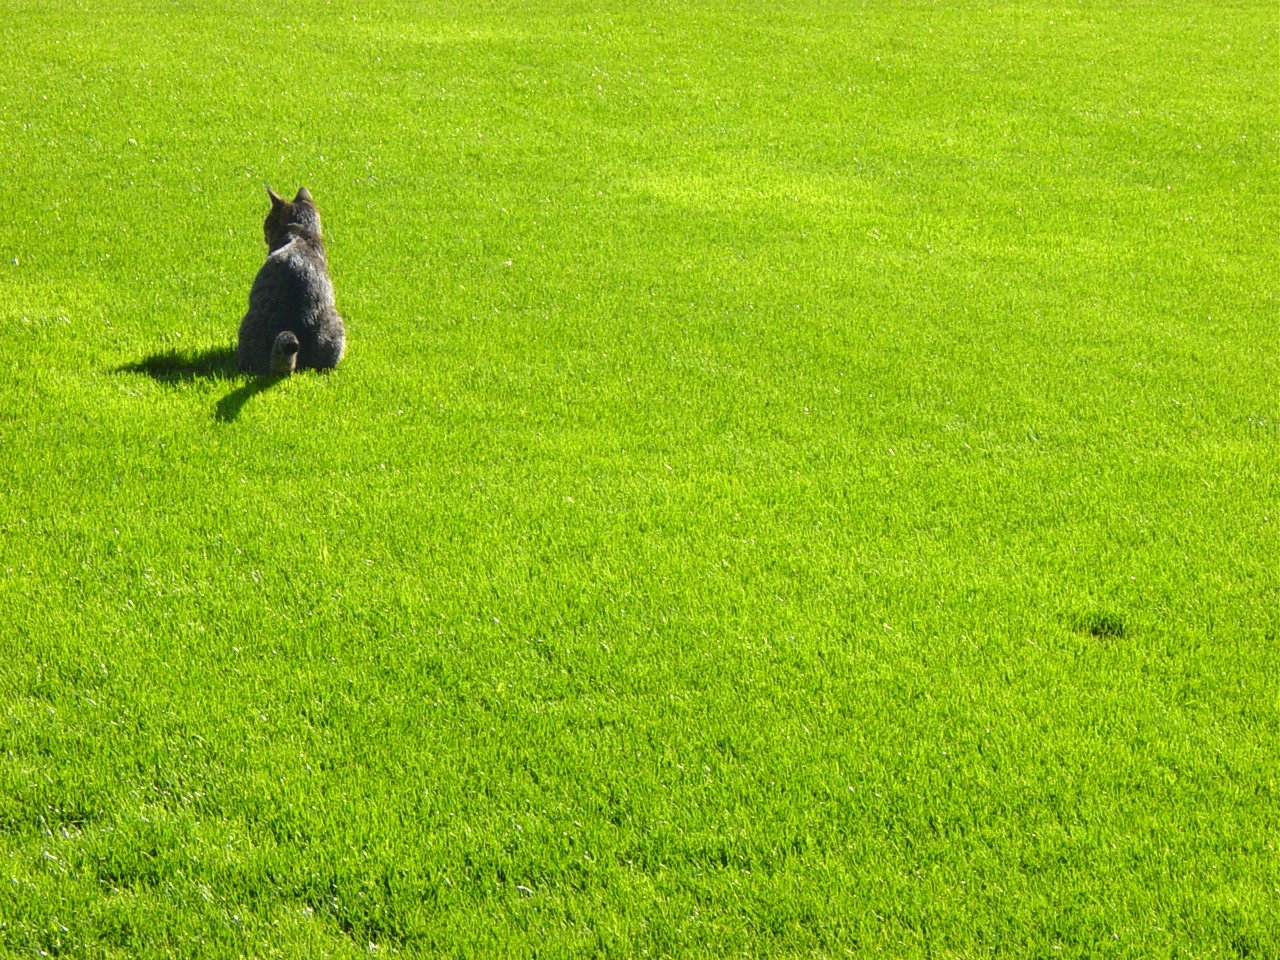 small dog on a grassy area looking up